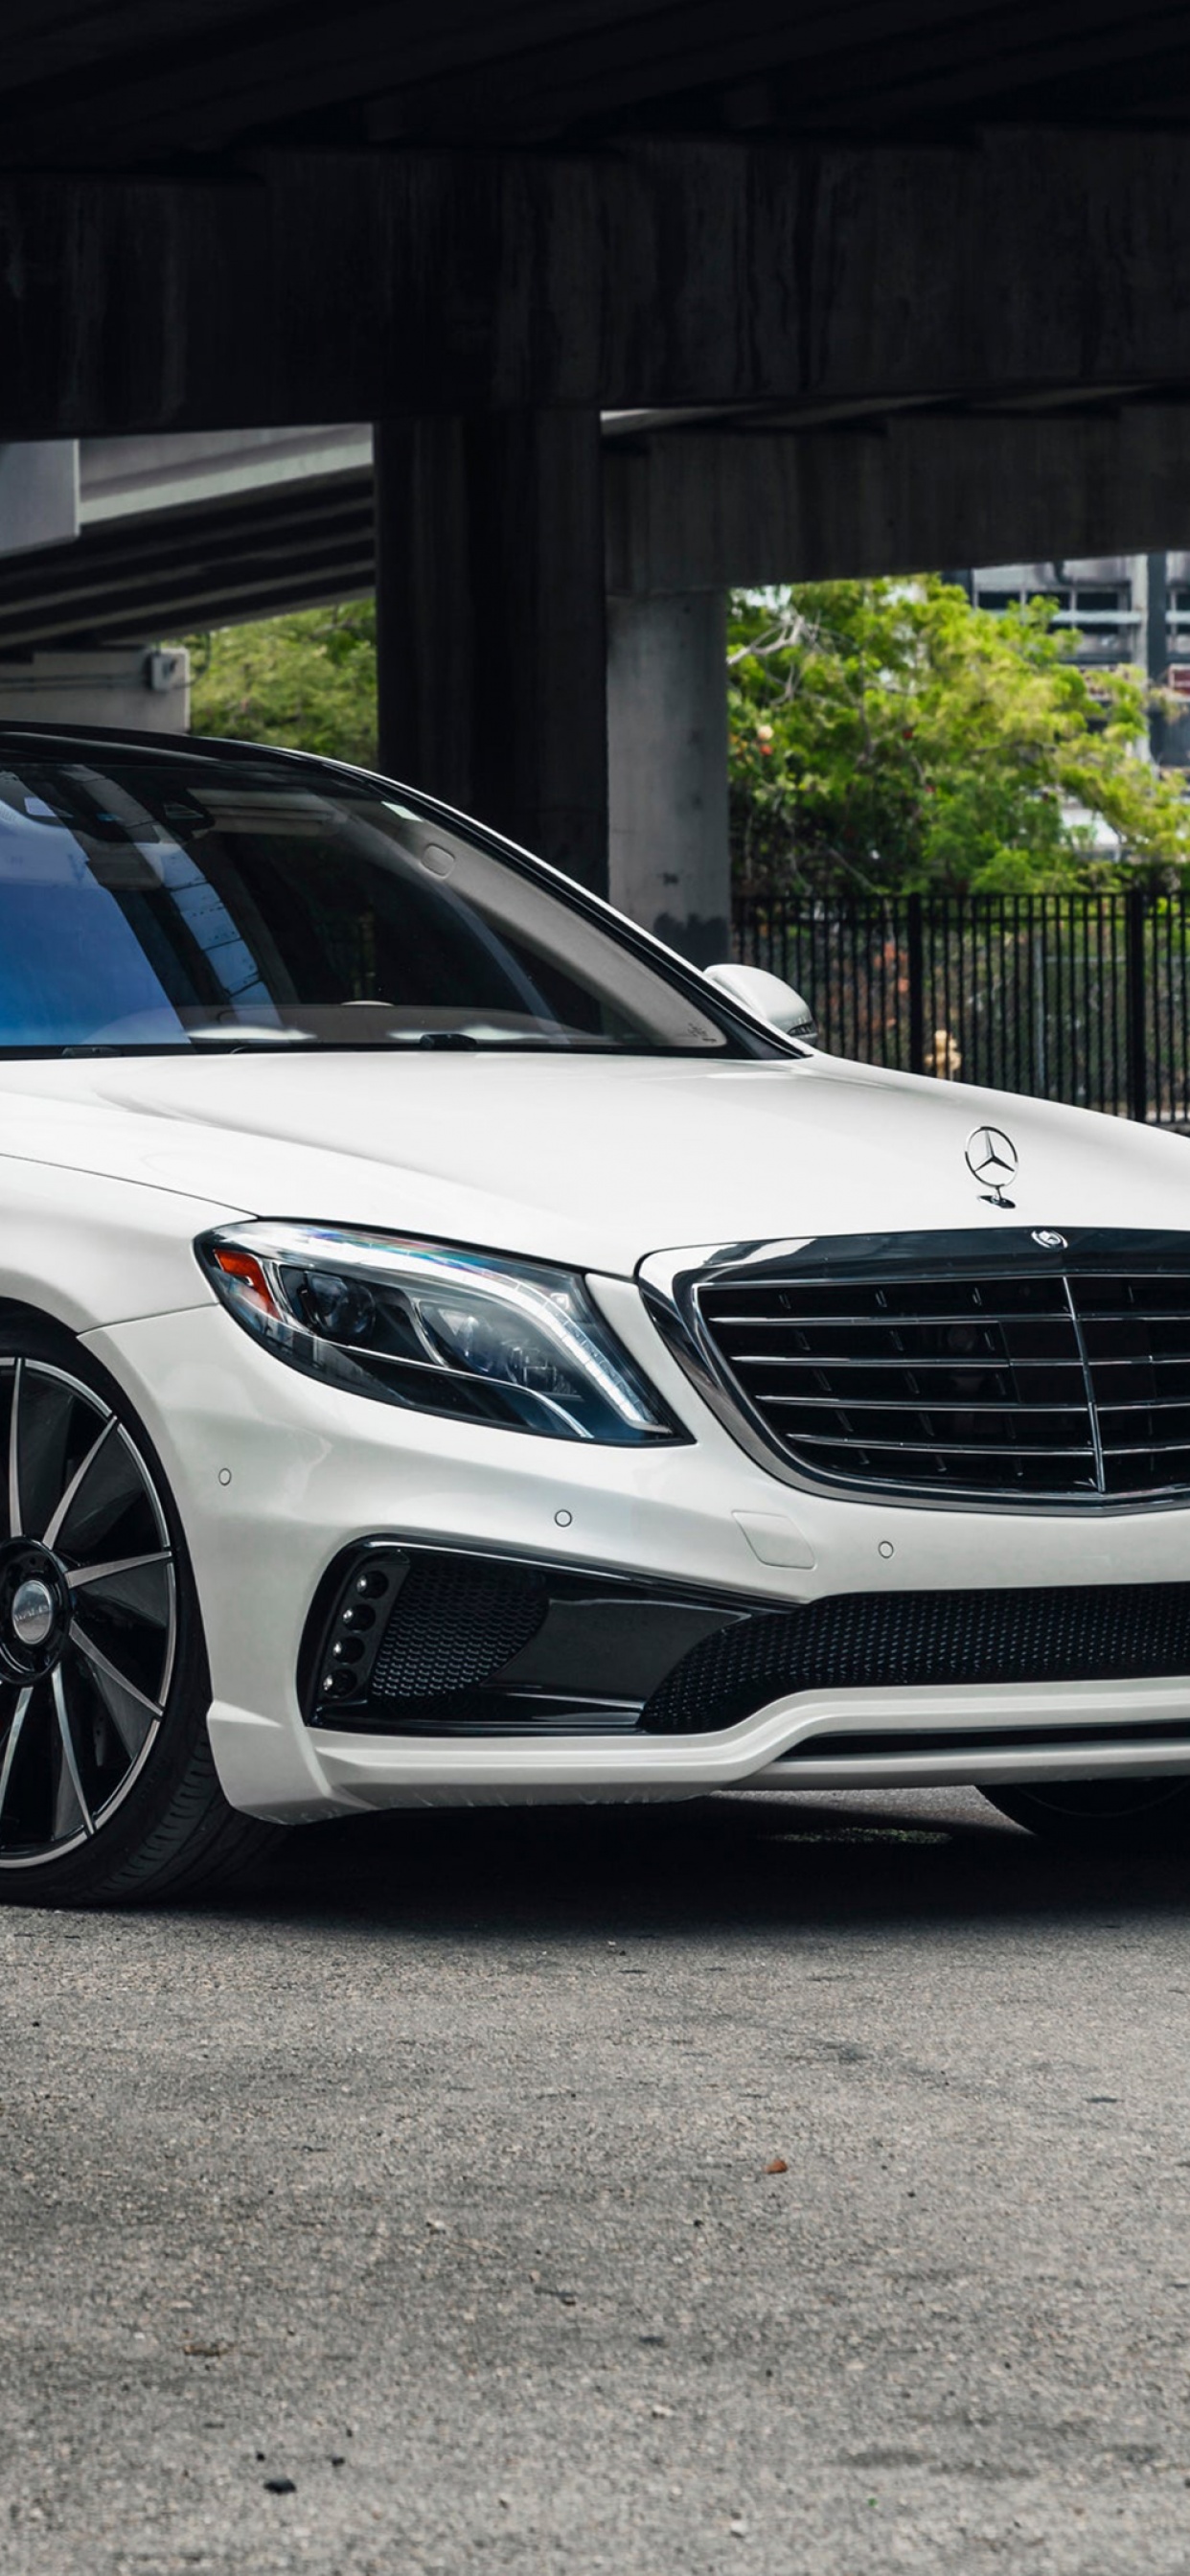 10+ Mercedes-Benz S 580 HD Wallpapers and Backgrounds